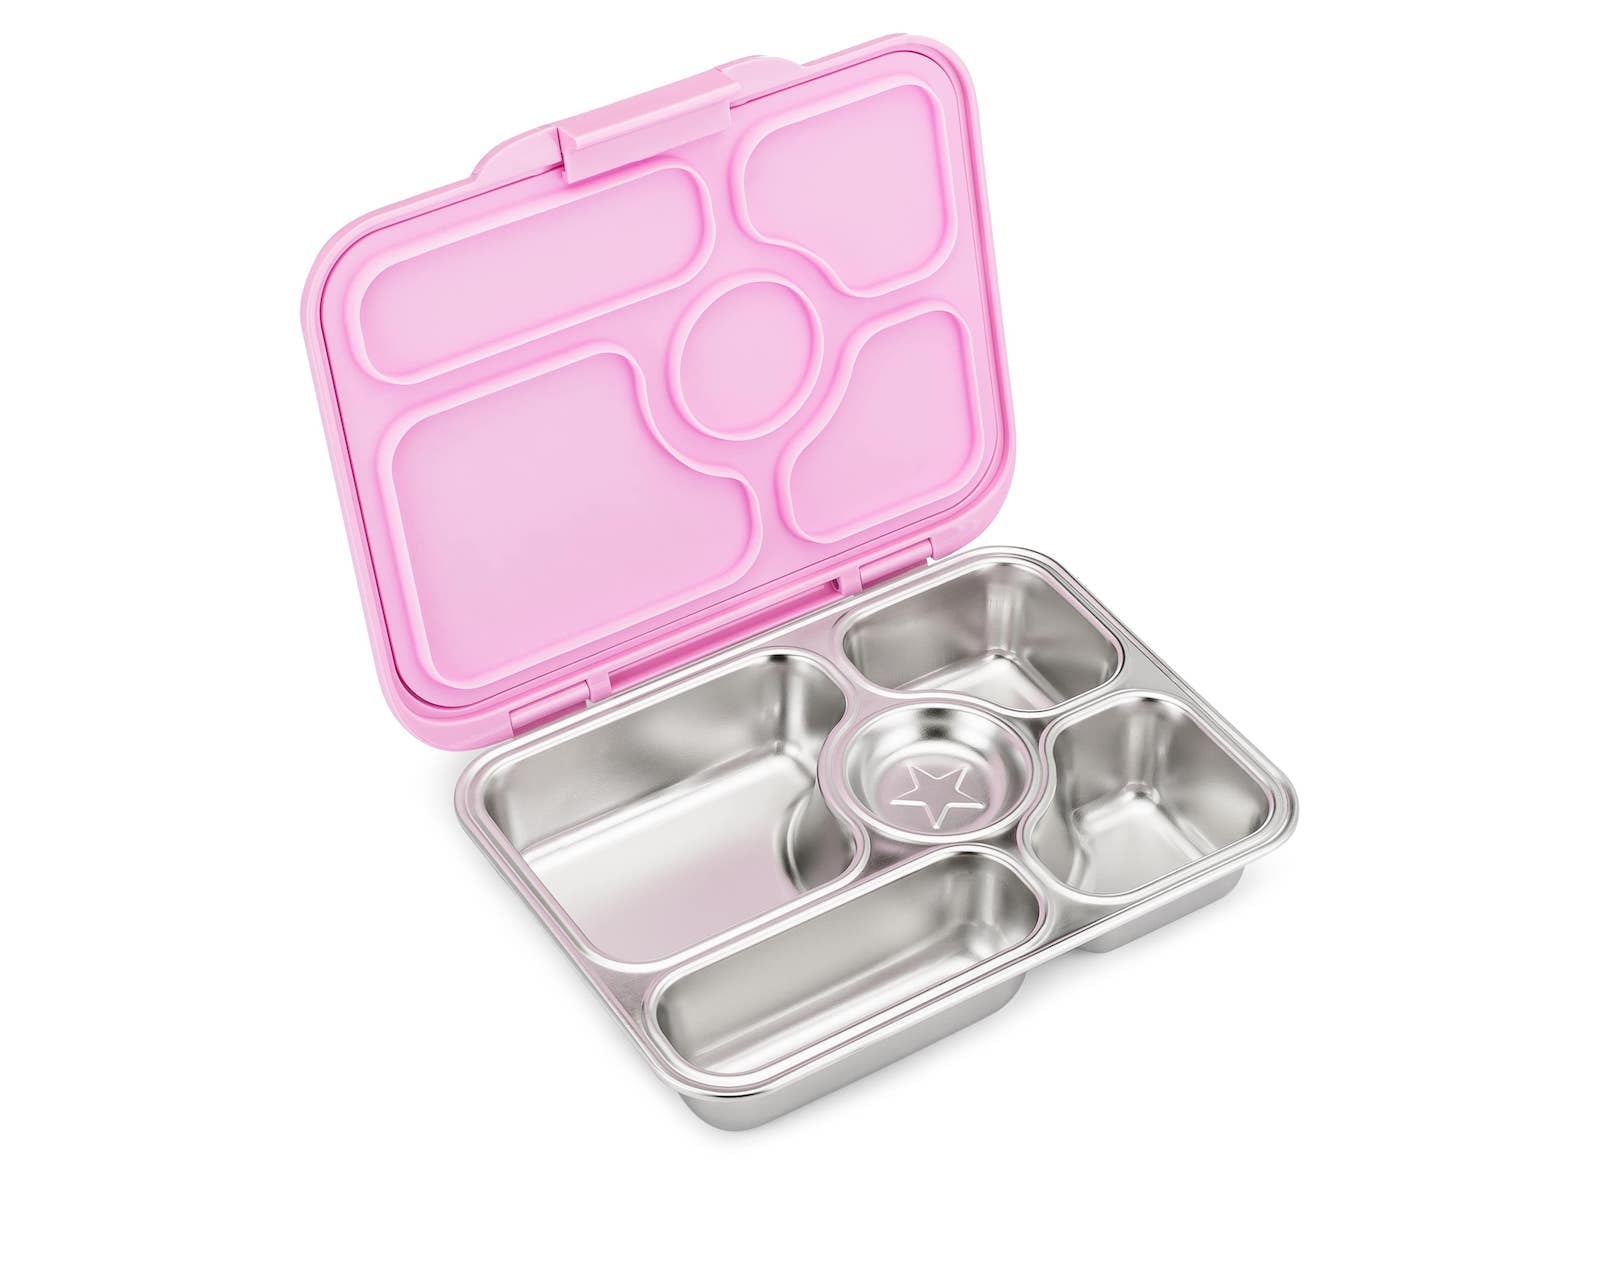 Little Lunch Box Co - Bento Stainless Maxi – Yum Yum Kids Store